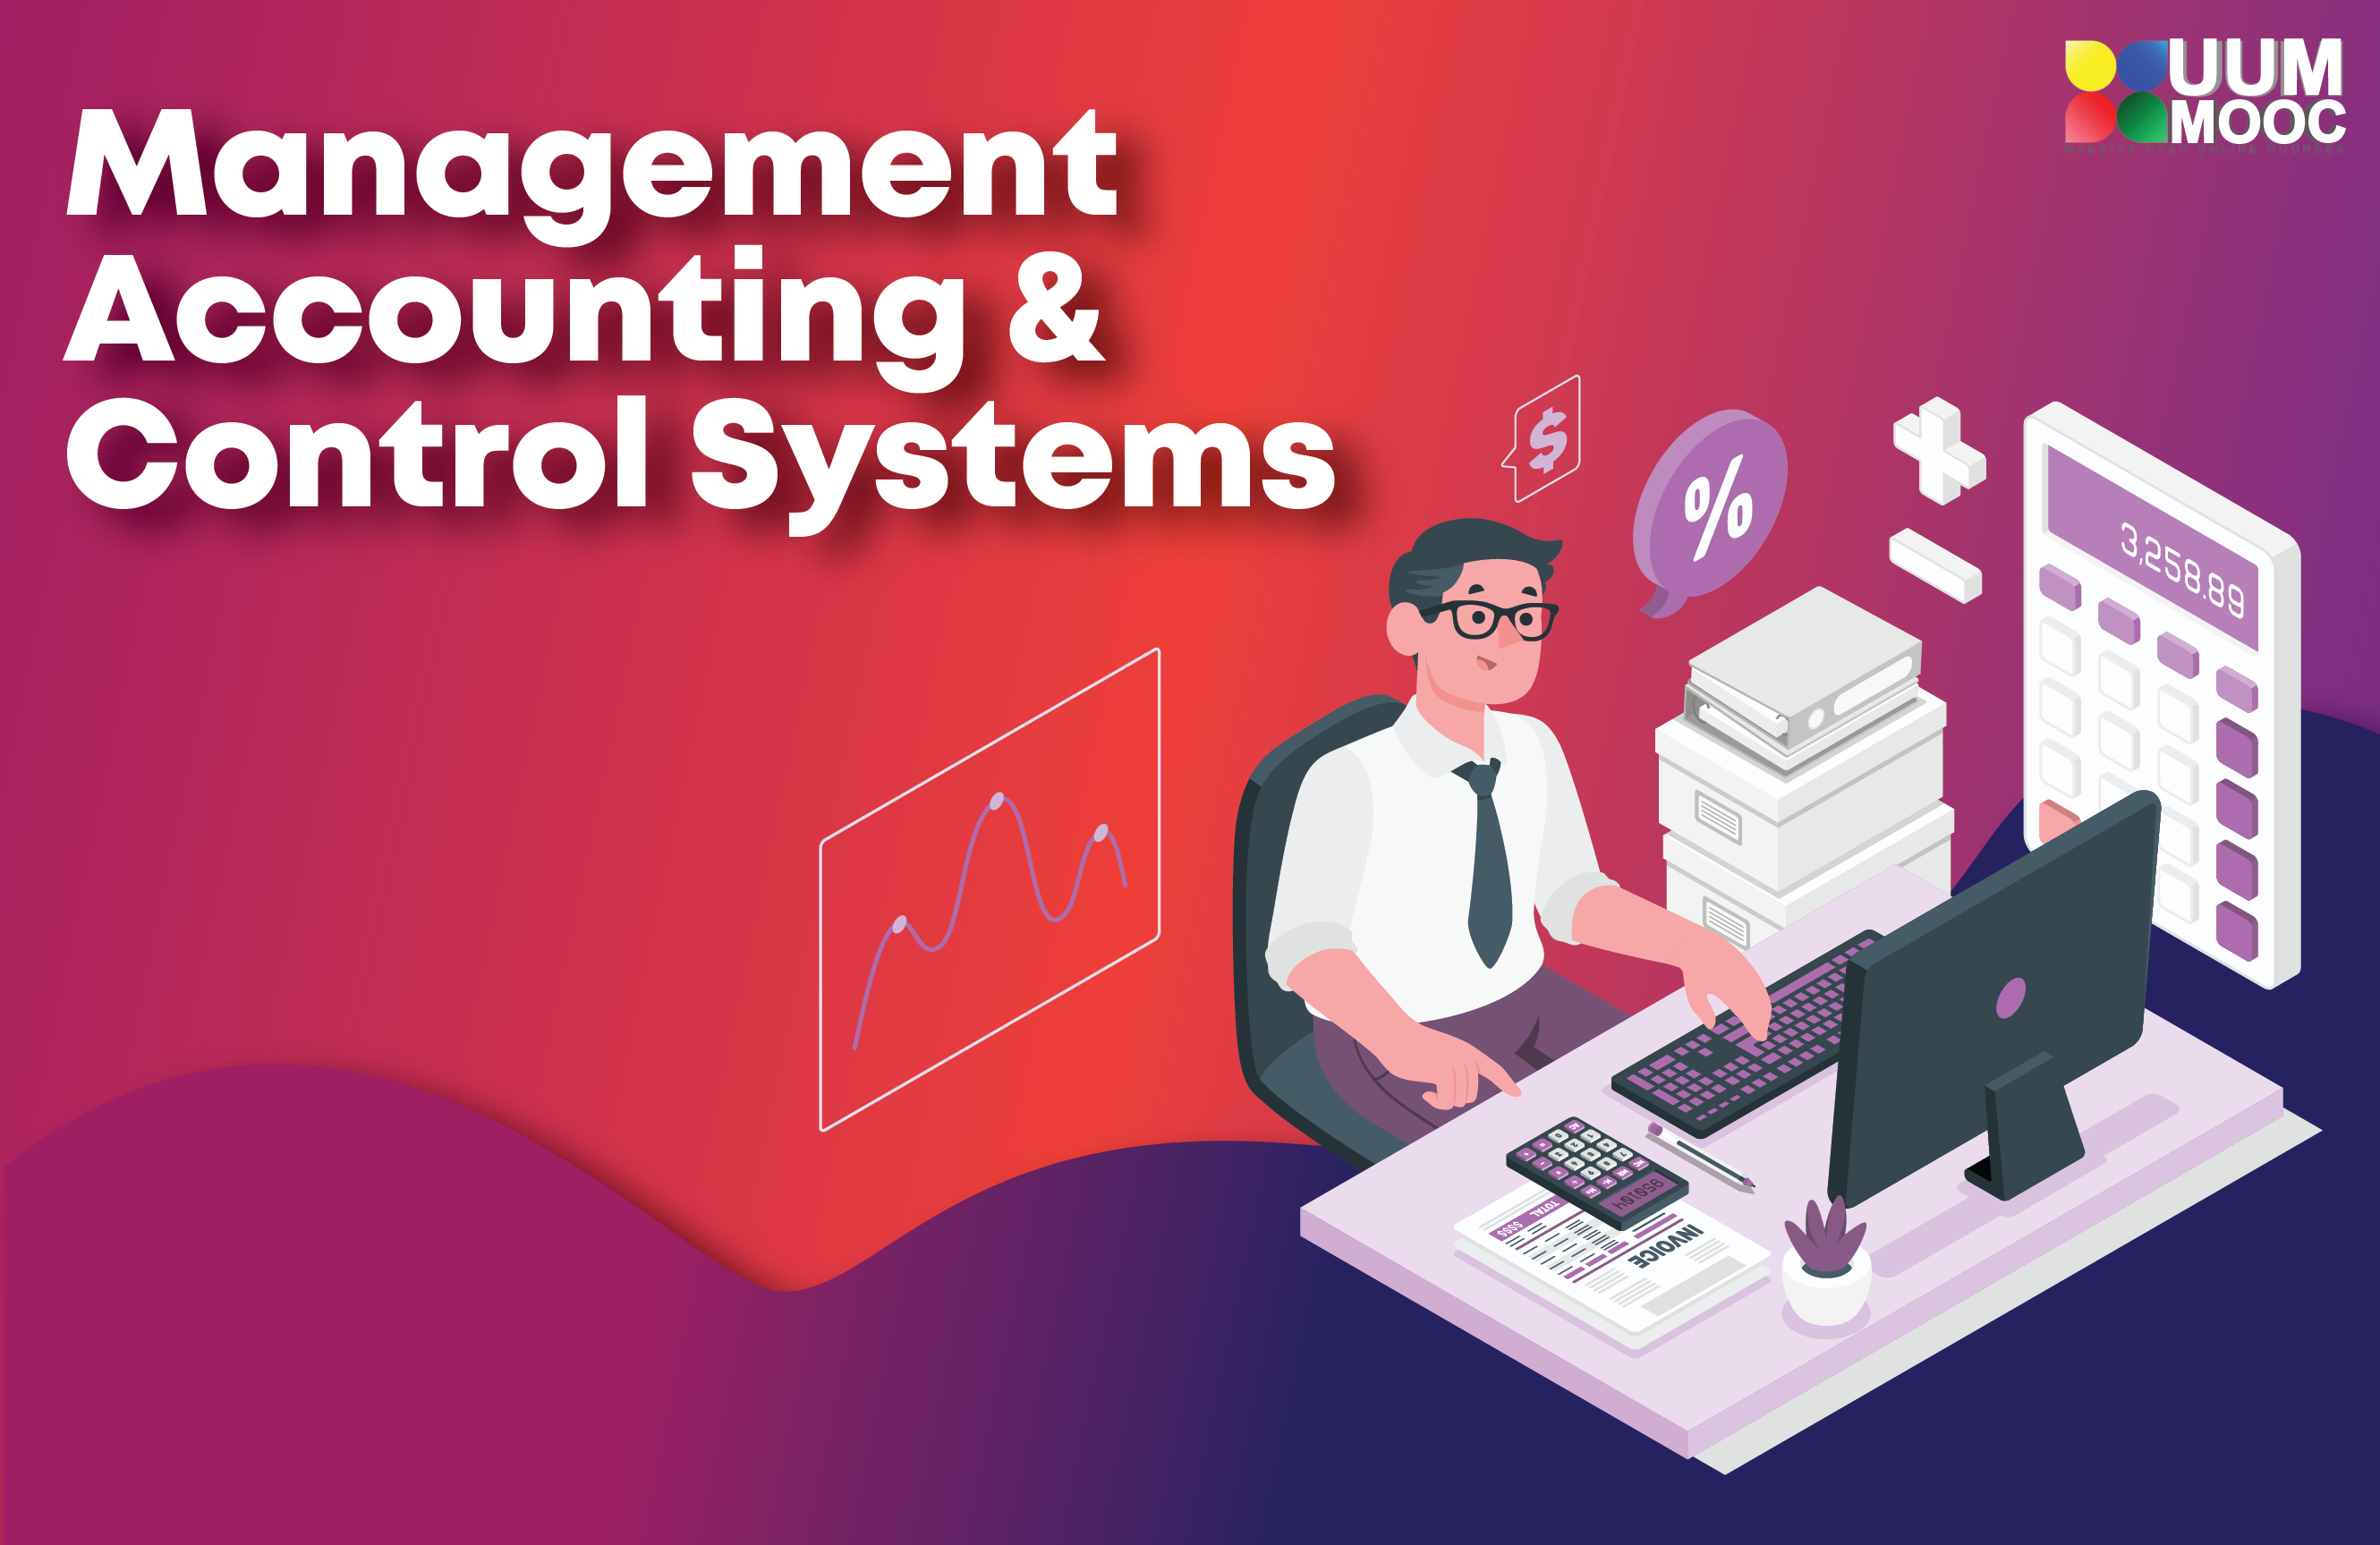 BKAM5023 Management Accounting & Control Systems